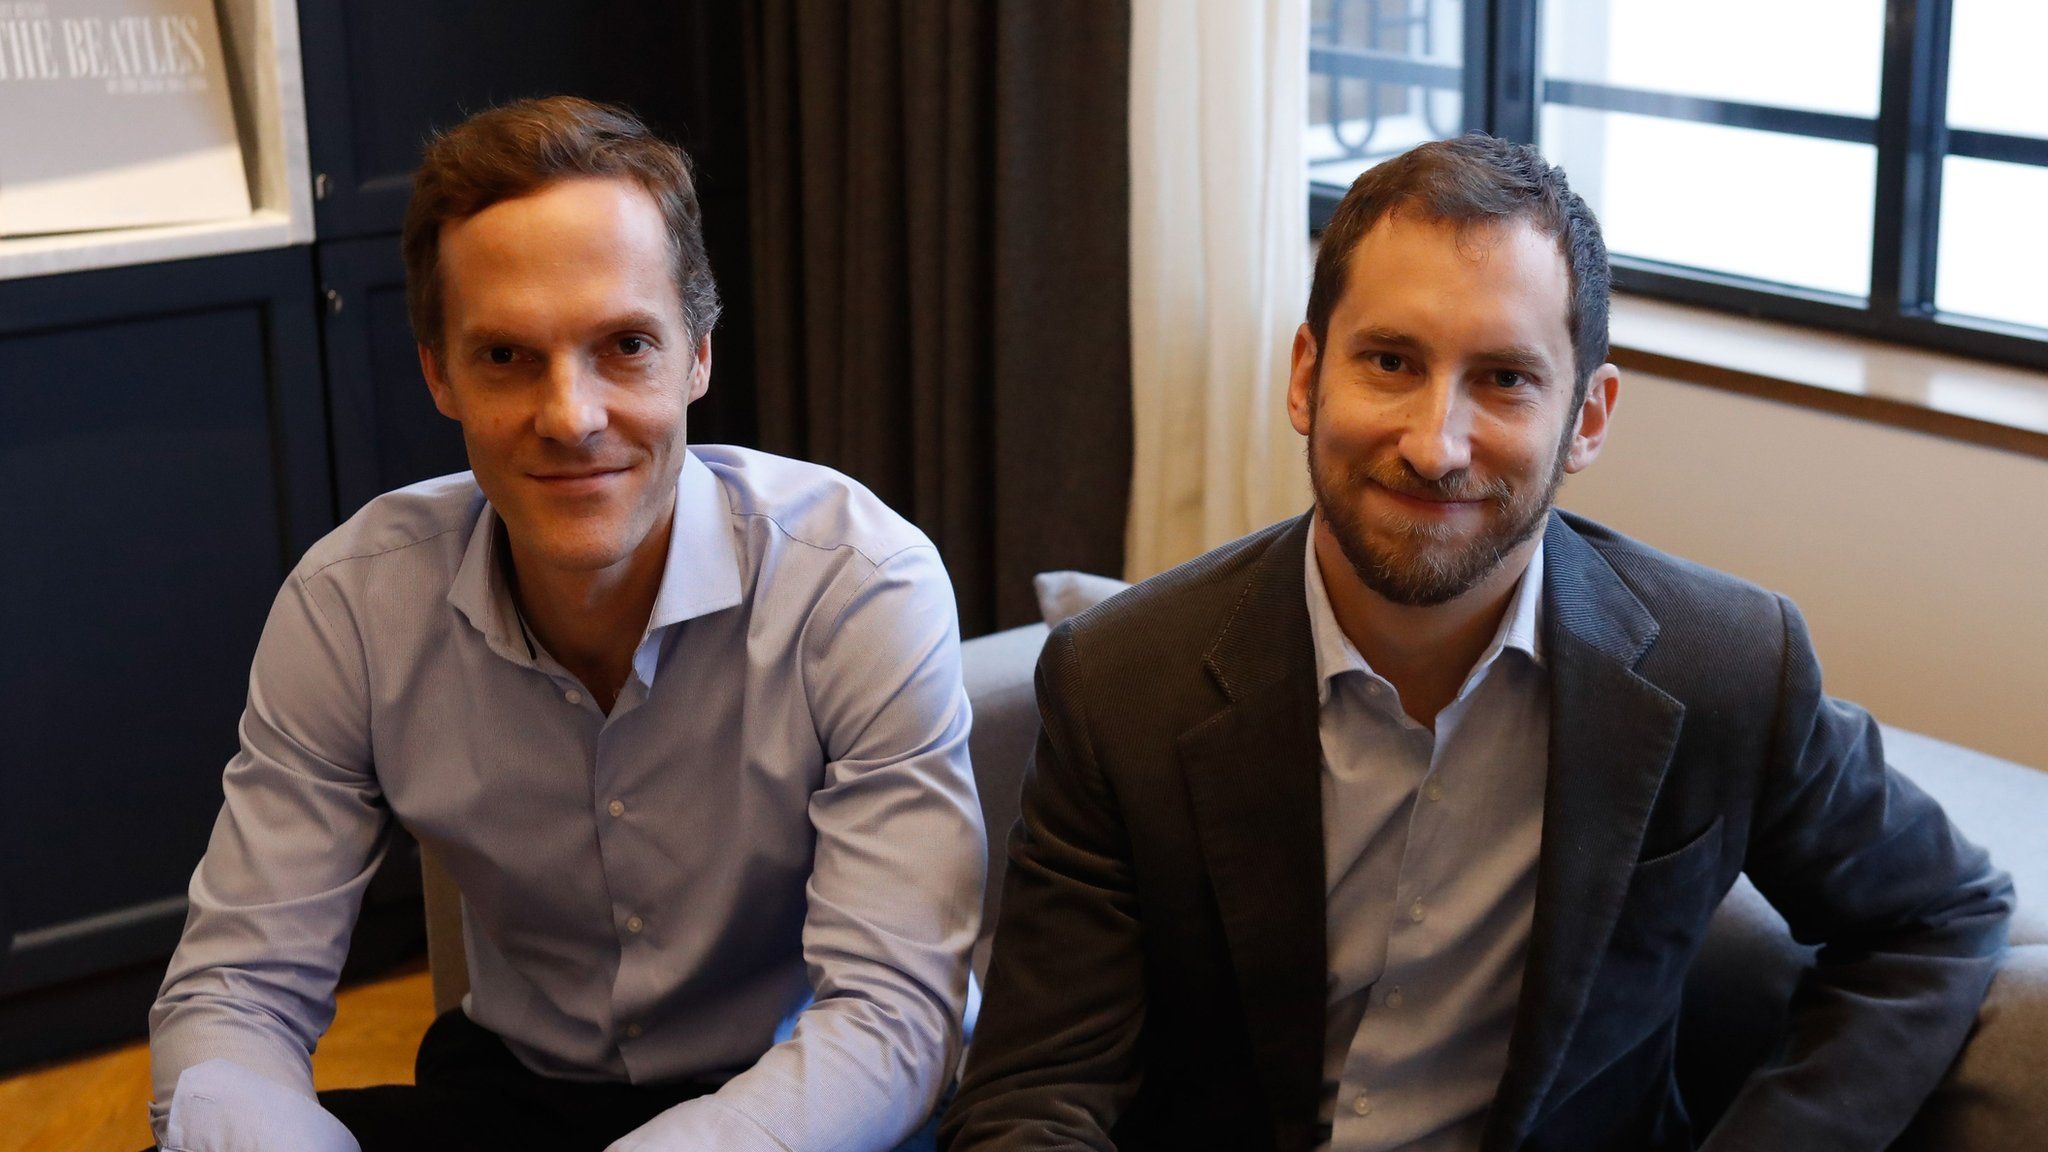 Co-founders of US start-up company Juul, Adam Bowen (L) and James Monsees pose in Paris on december 5, 2018.